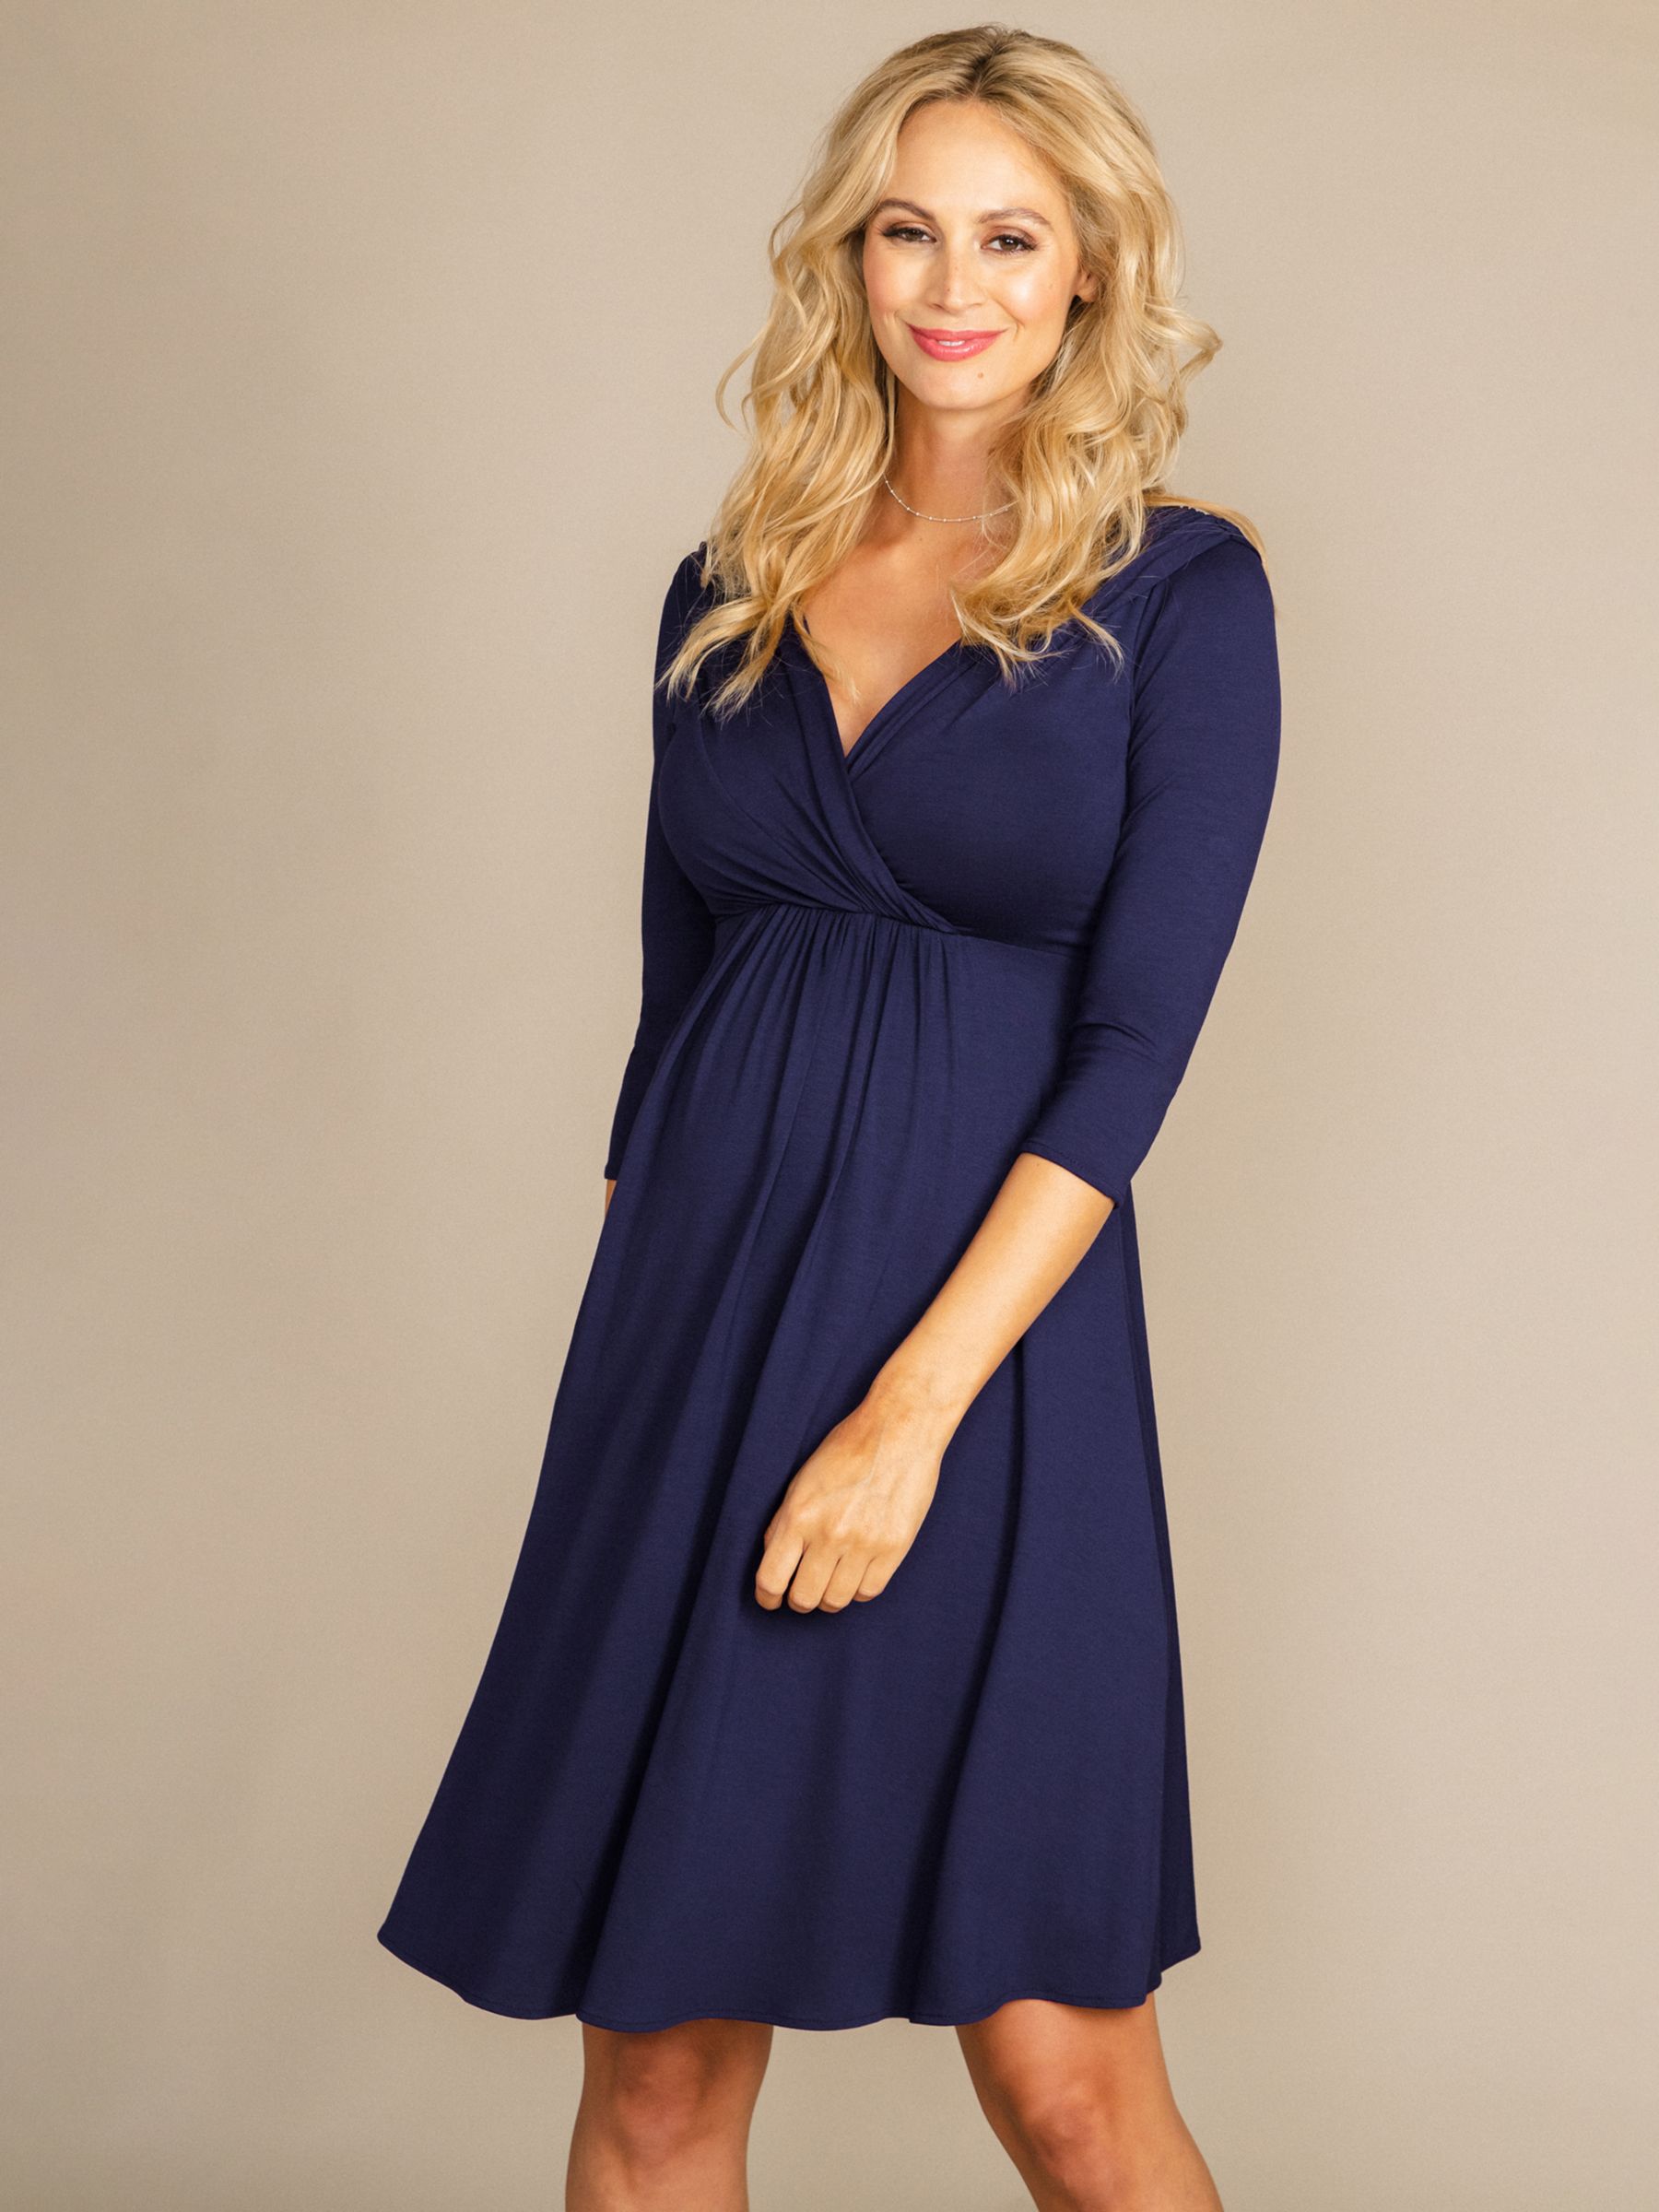 Tiffany Rose Willow Maternity Dress, Eclipse Blue, 6-8